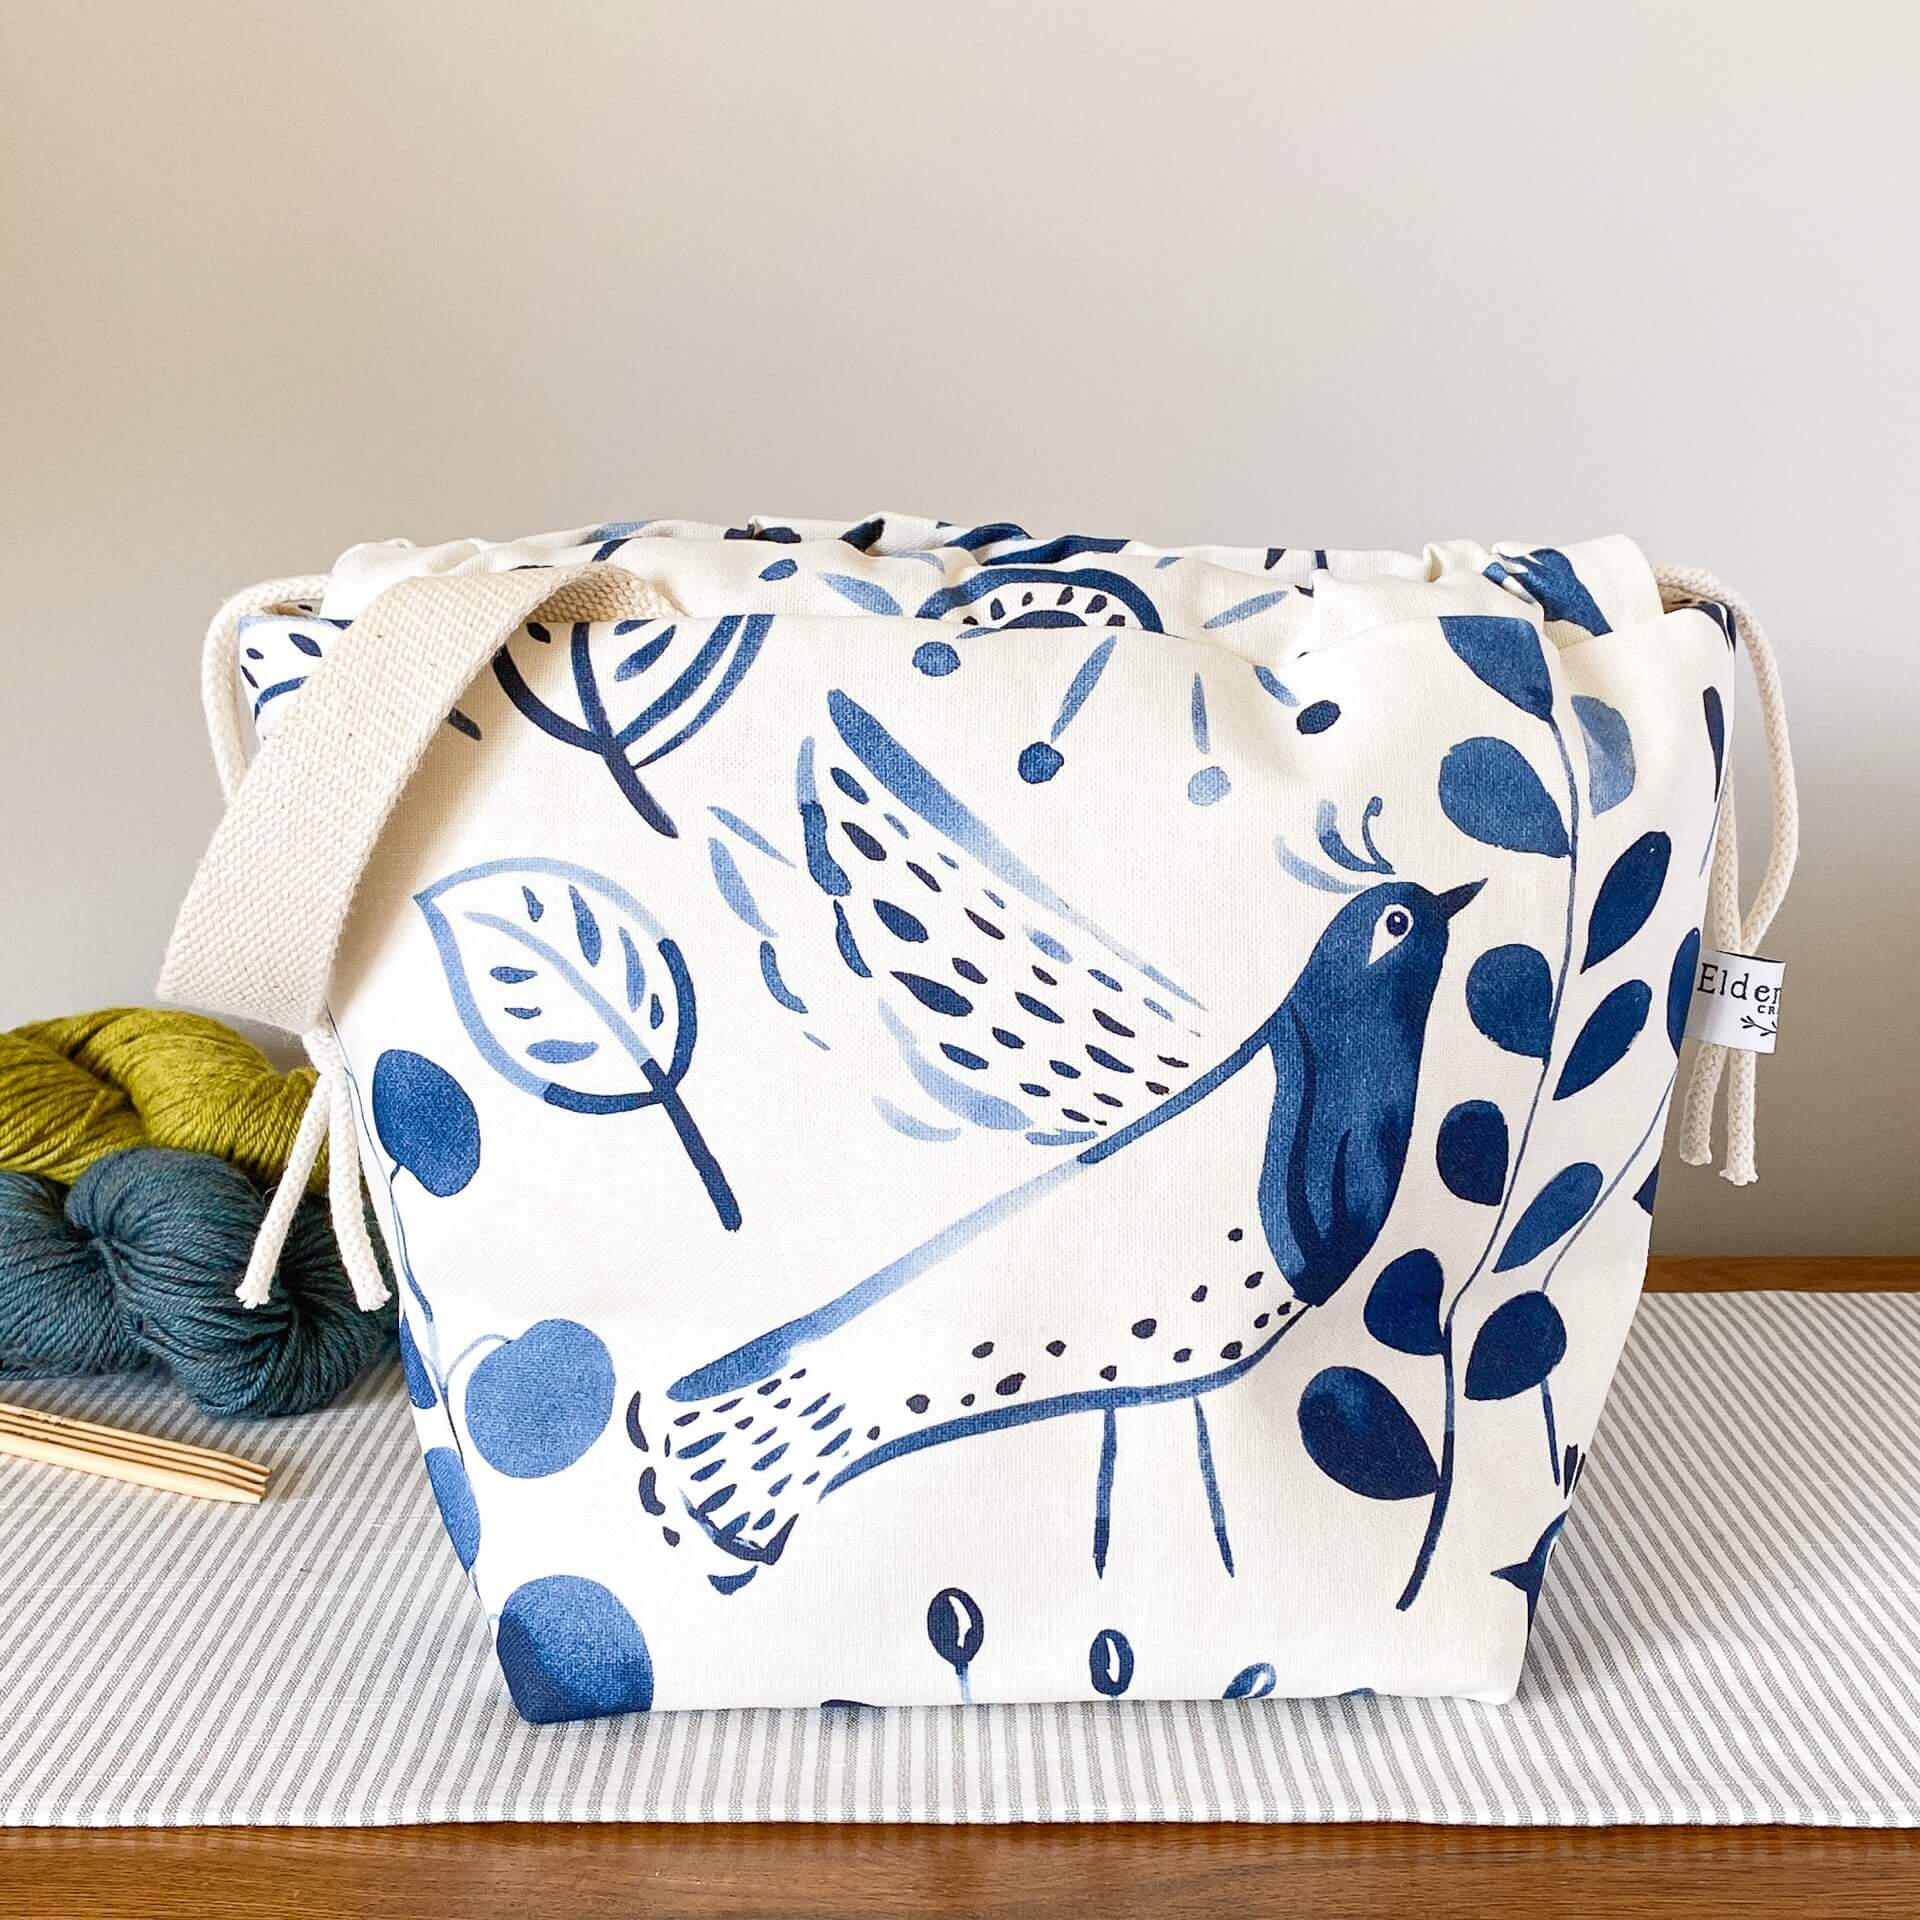 Alt text: A knitting project bag made of fabric with a folk art indigo print sits on a table. Three colorful skeins of yarn are positioned behind the bag, adding a vibrant touch.